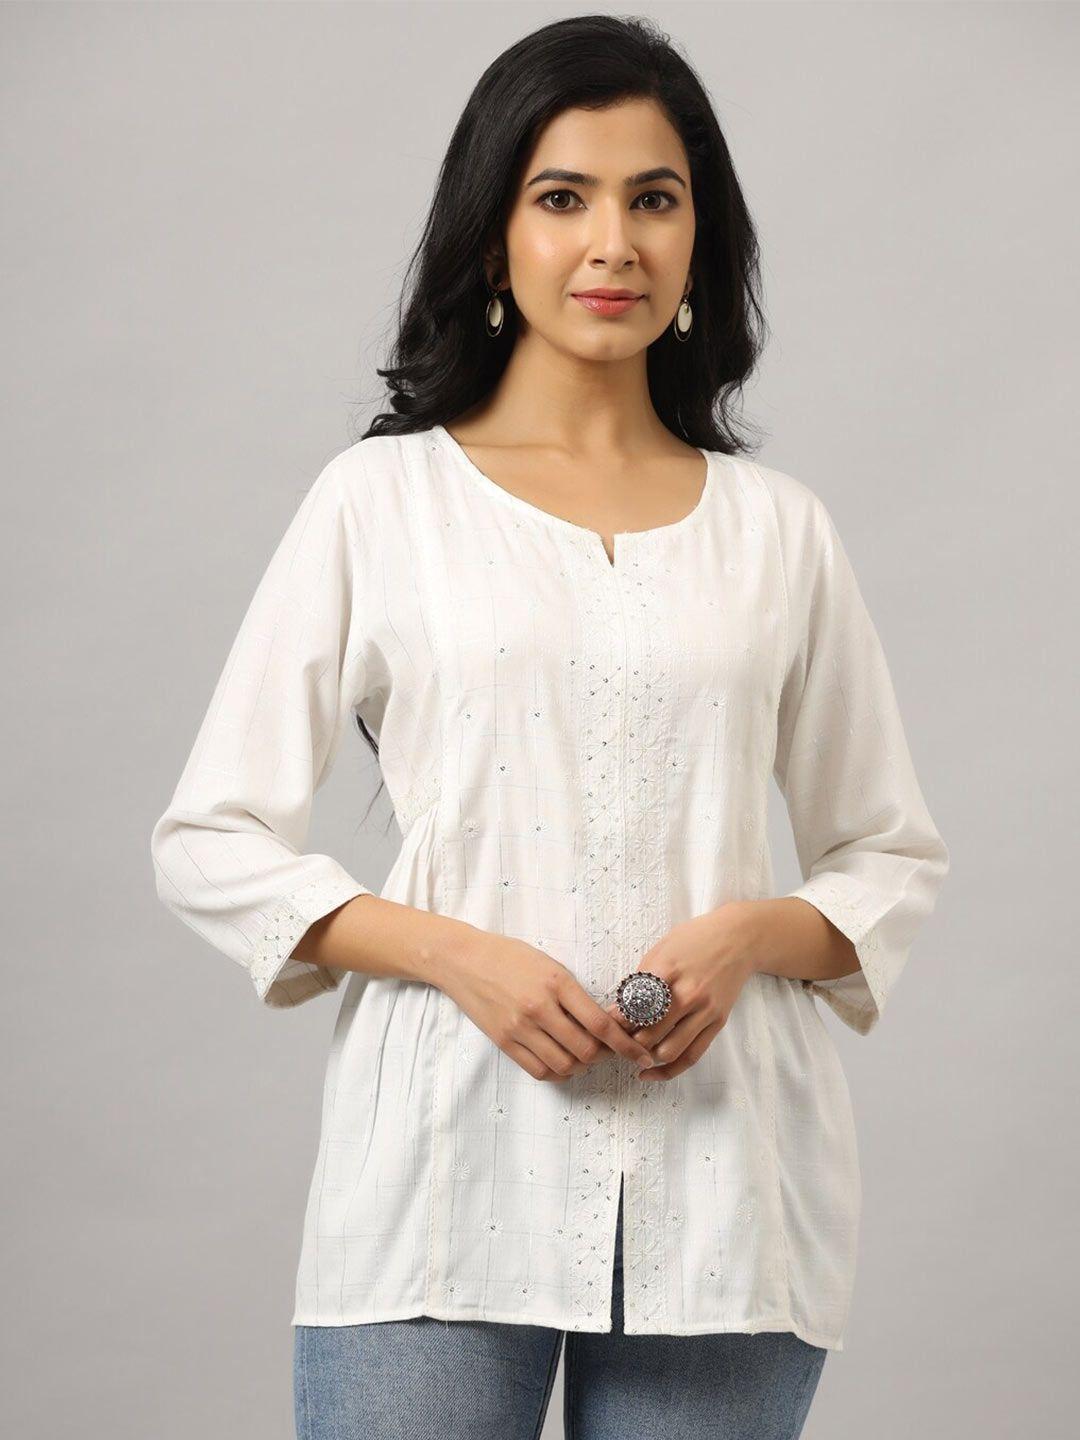 amchoor-floral-embroidered-casual-top